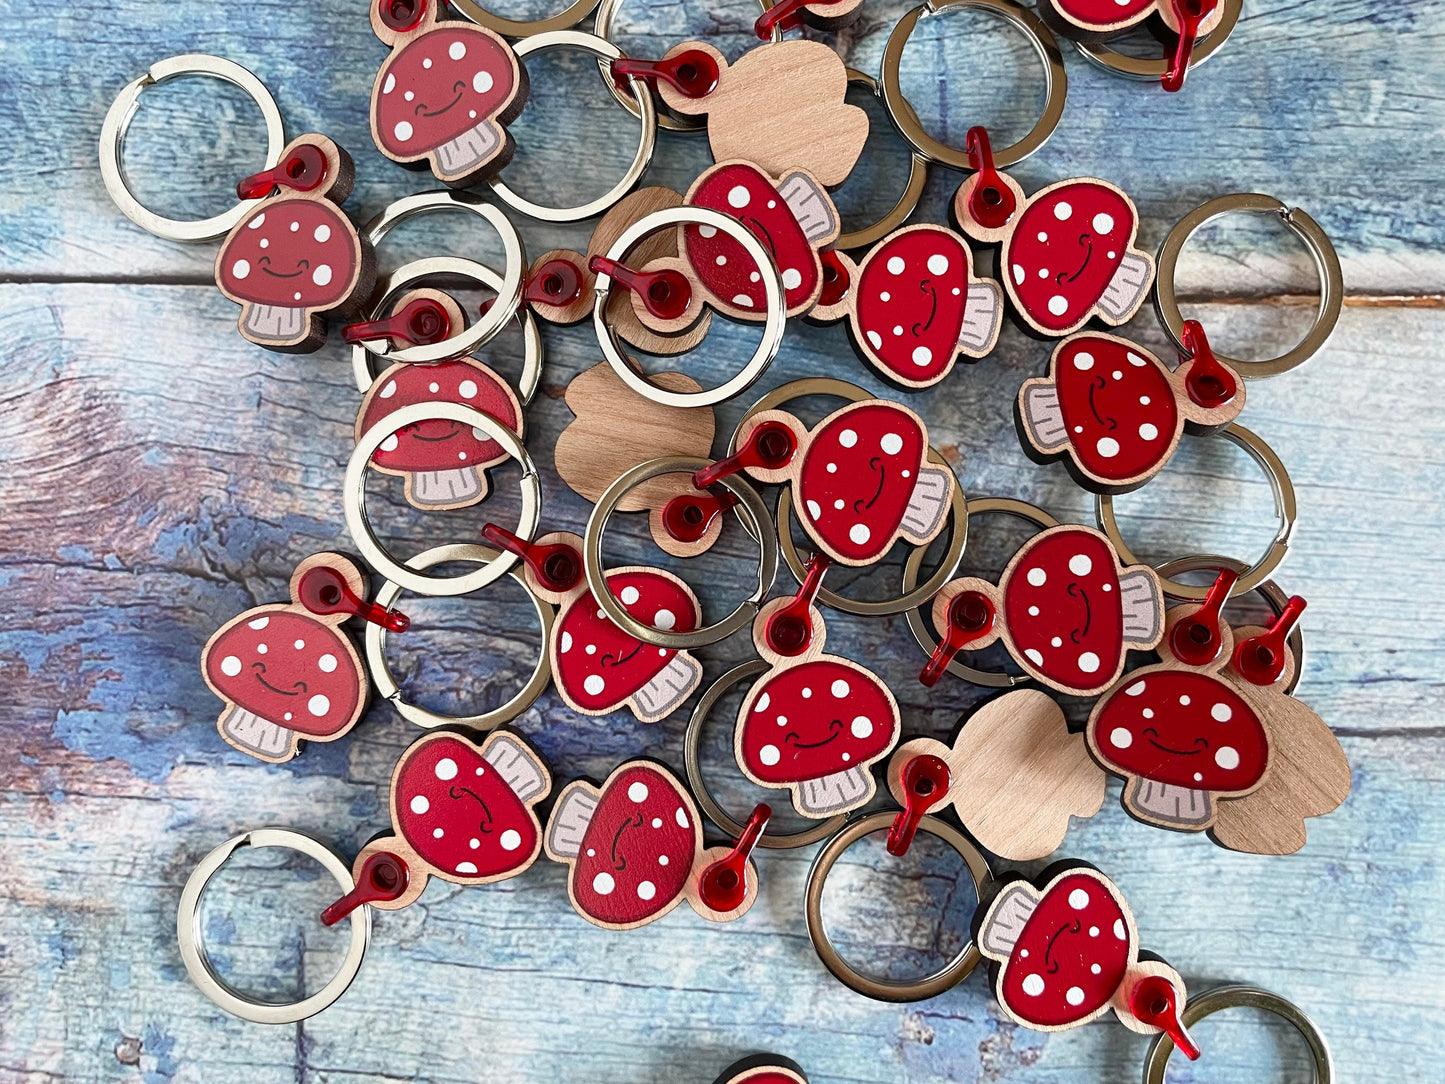 A picture of lots of cute red mushroom wooden keyrings made with cherry wood